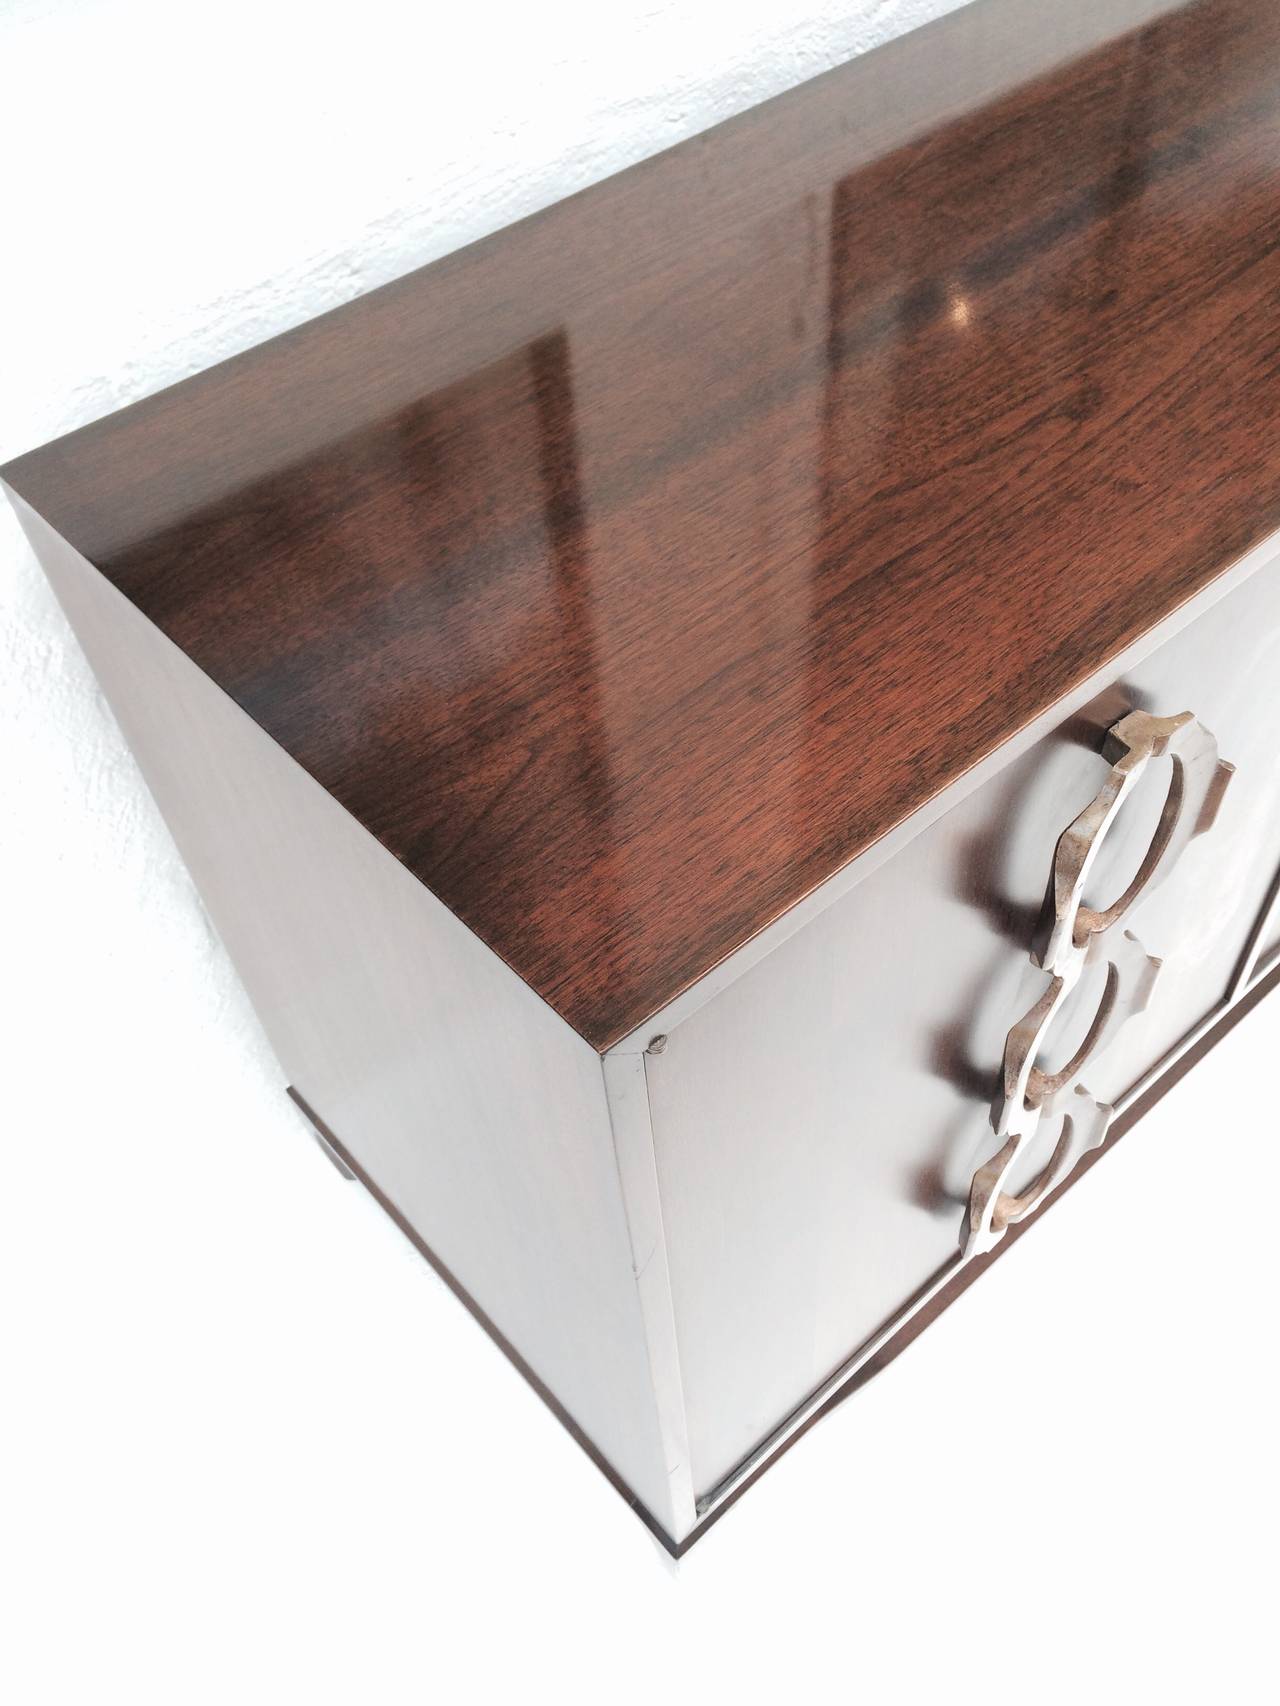 Walnut Gorgeous Credenza with Stunning Door Pulls by Cal Mode